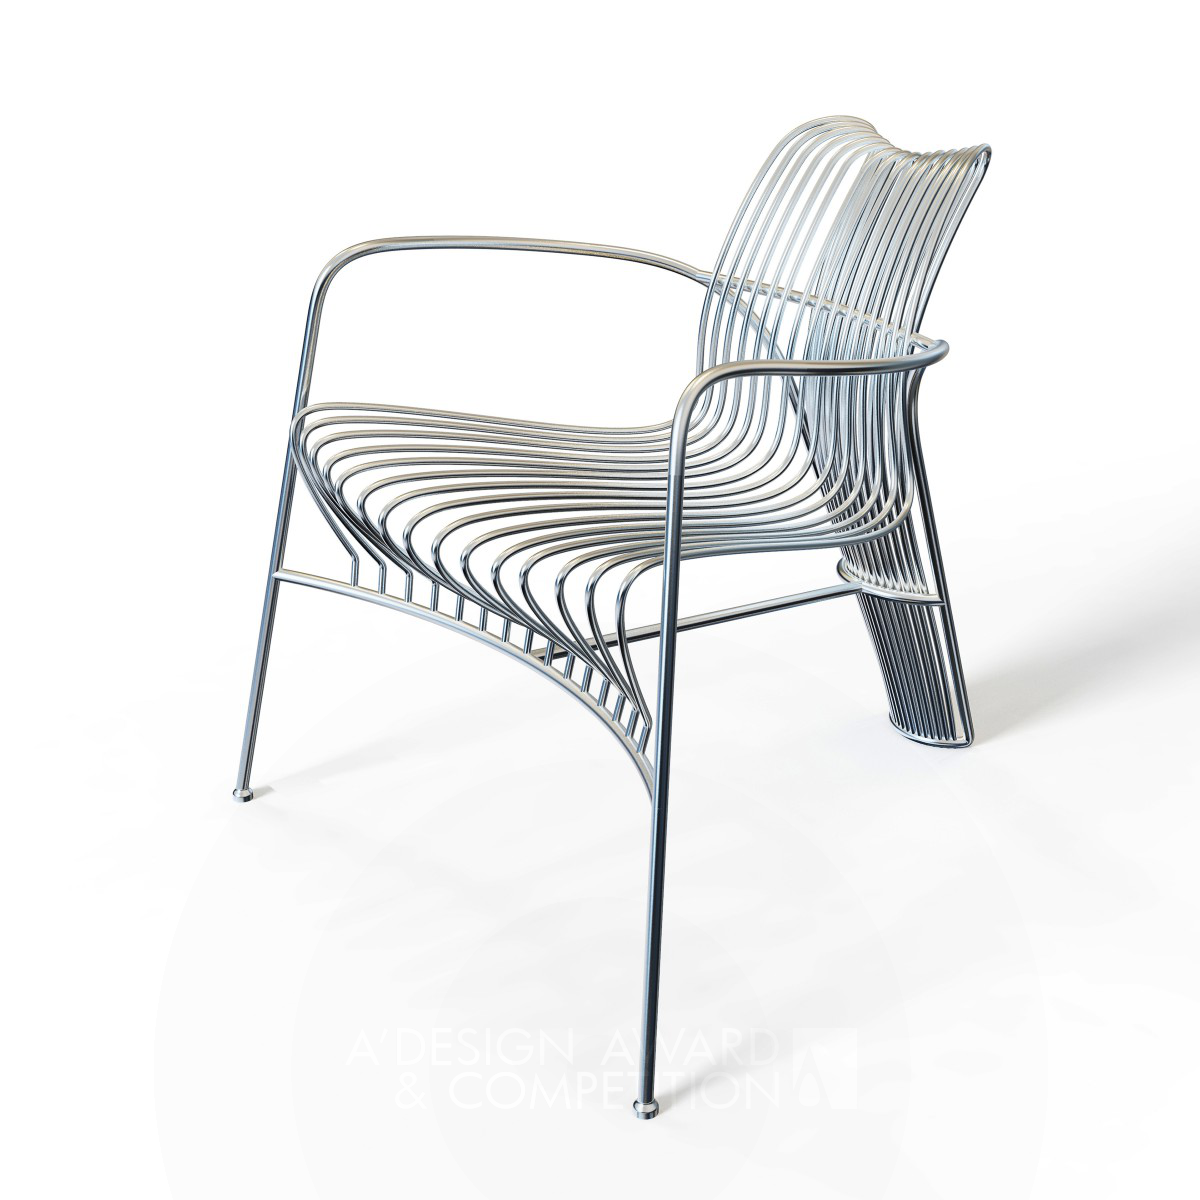 Strings: A Unique Leisure Chair Inspired by Melodies